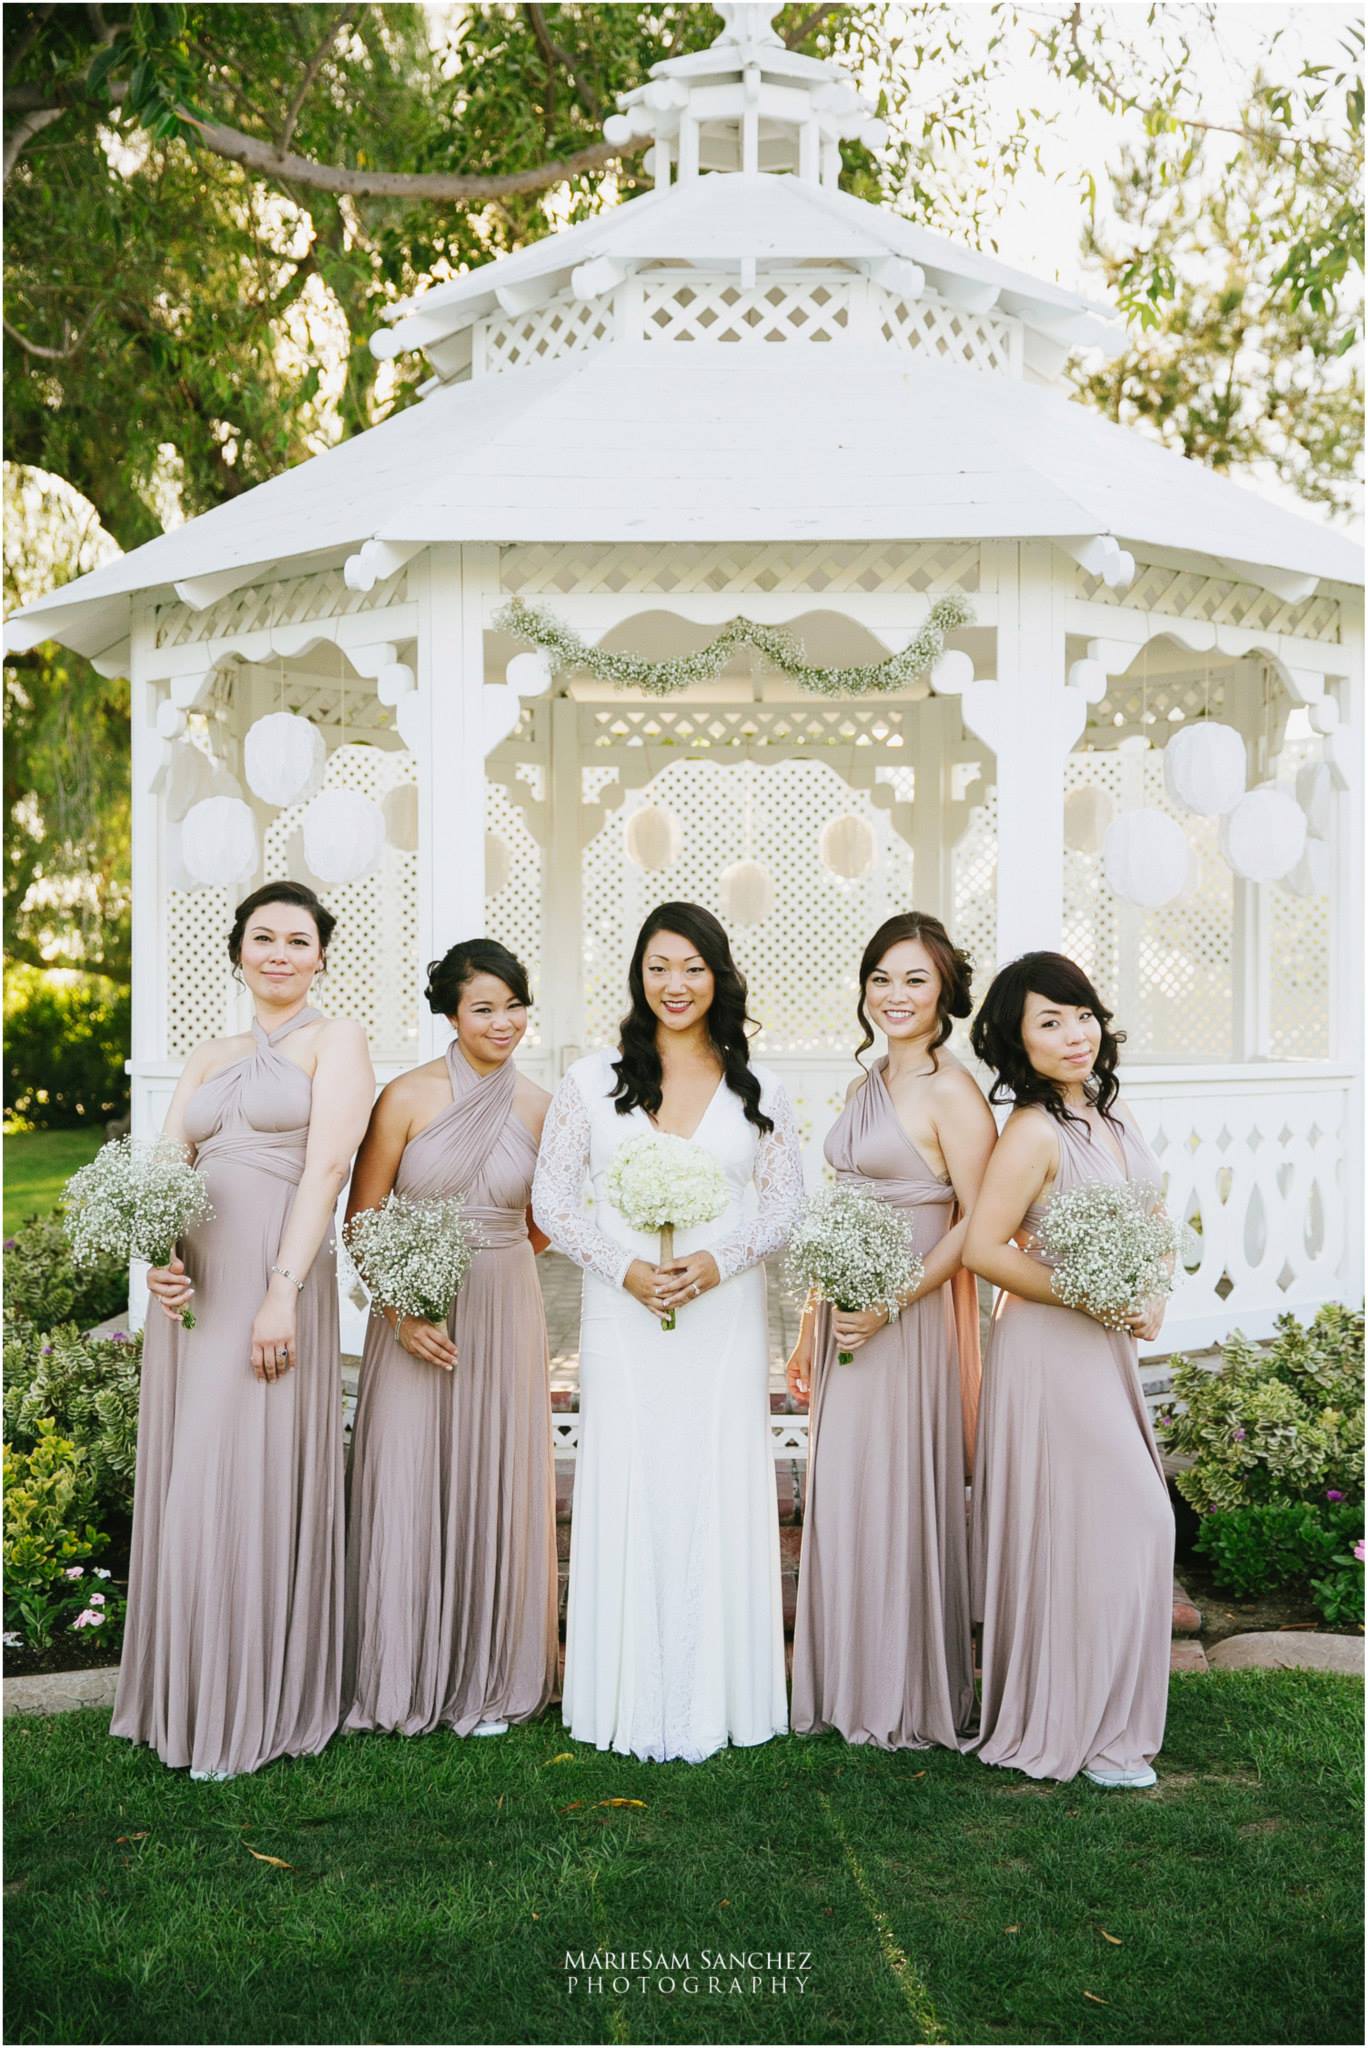 More information about "Wedding Finds: The Bridesmaid Convertible Dress"